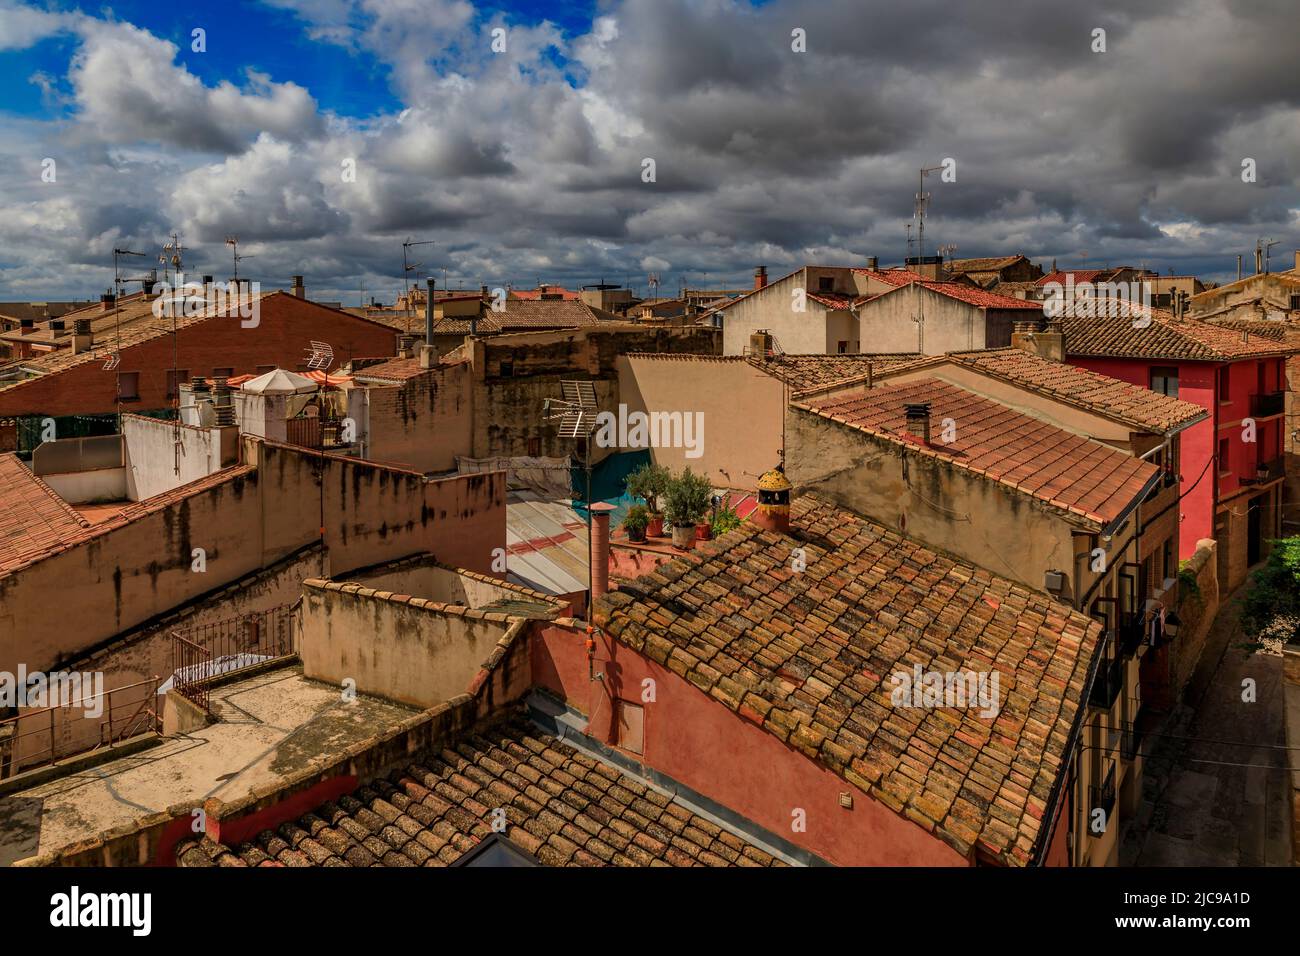 Aerial view of terracotta tiles of the roofs of medieval stone houses in Olite, Spain famous for a magnificent Royal Palace castle Stock Photo